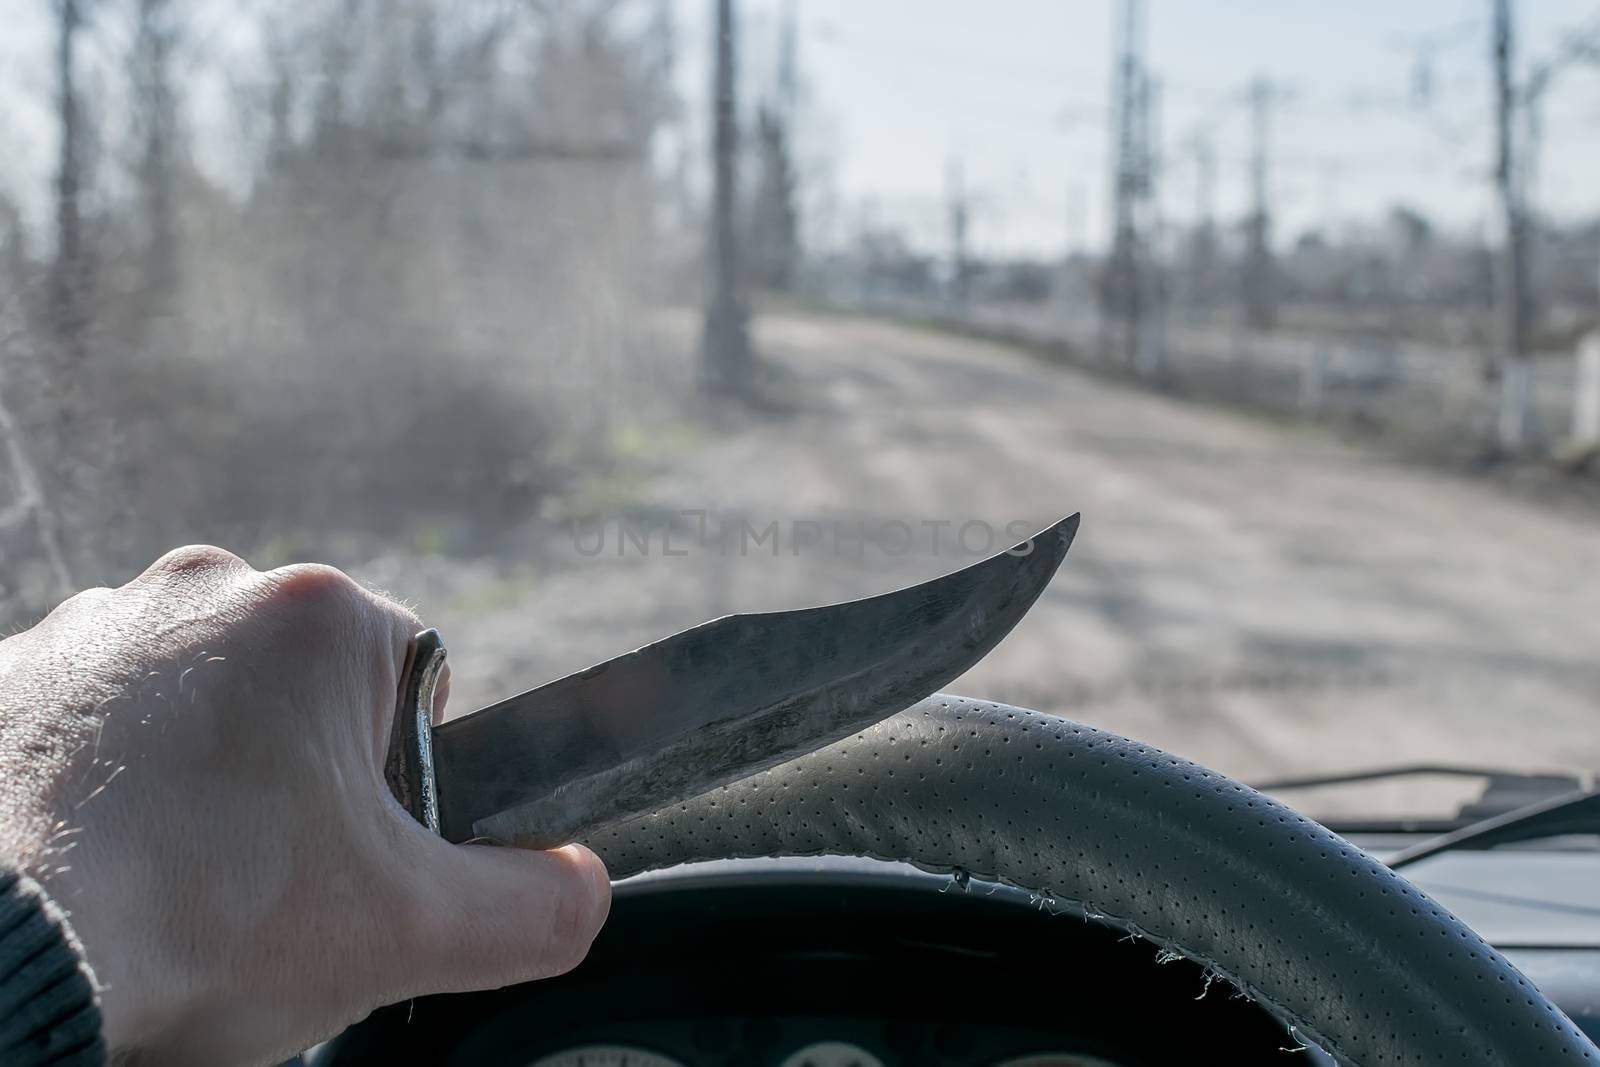 Crime, man, driving a car holding a knife, riding on the road